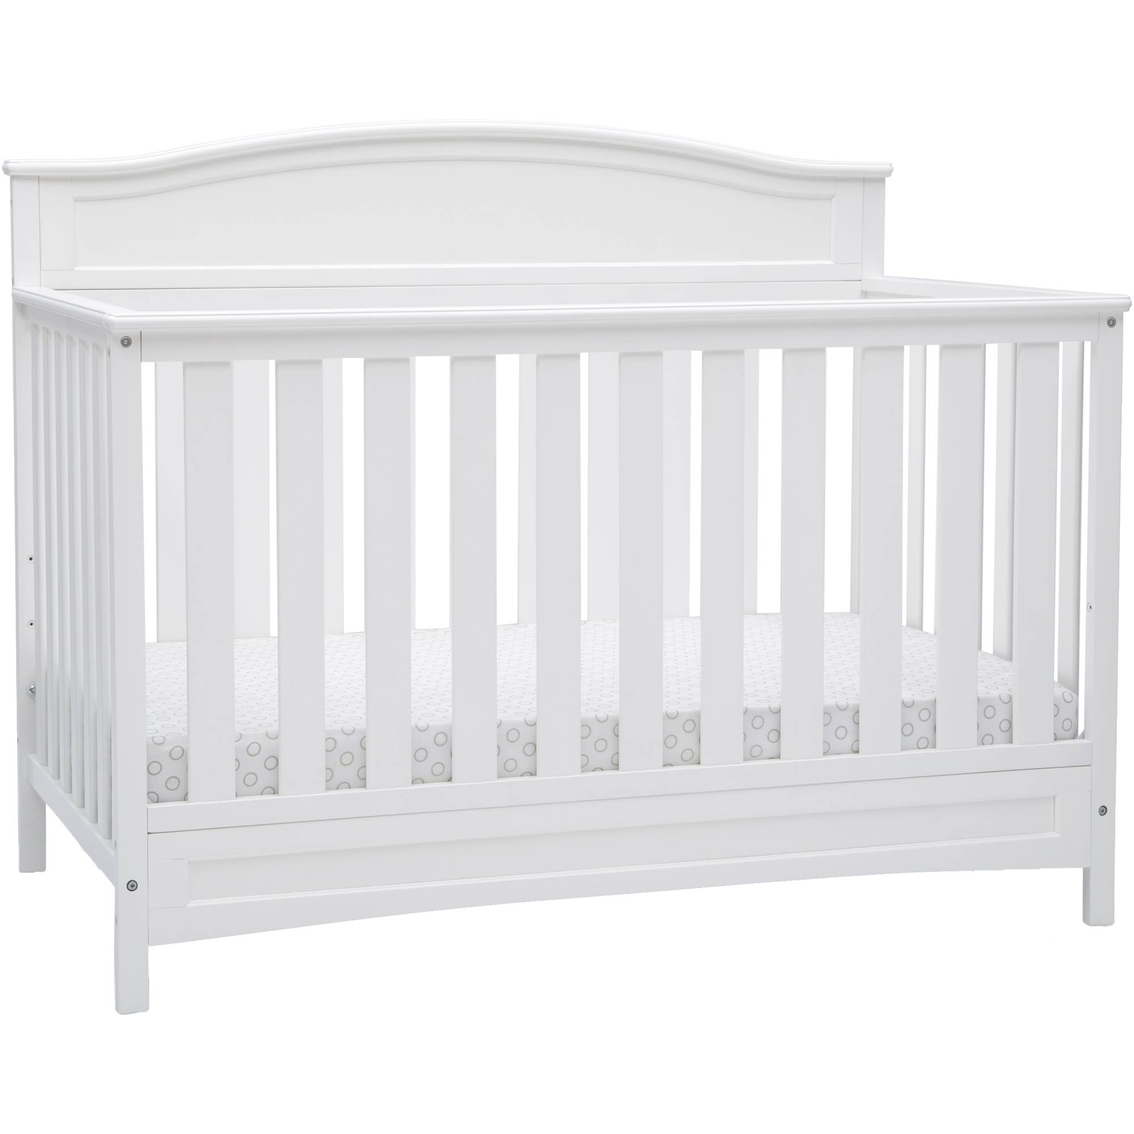 Delta Children Emery 4 in 1 Convertible Crib, Greenguard Gold Certified - Image 2 of 3